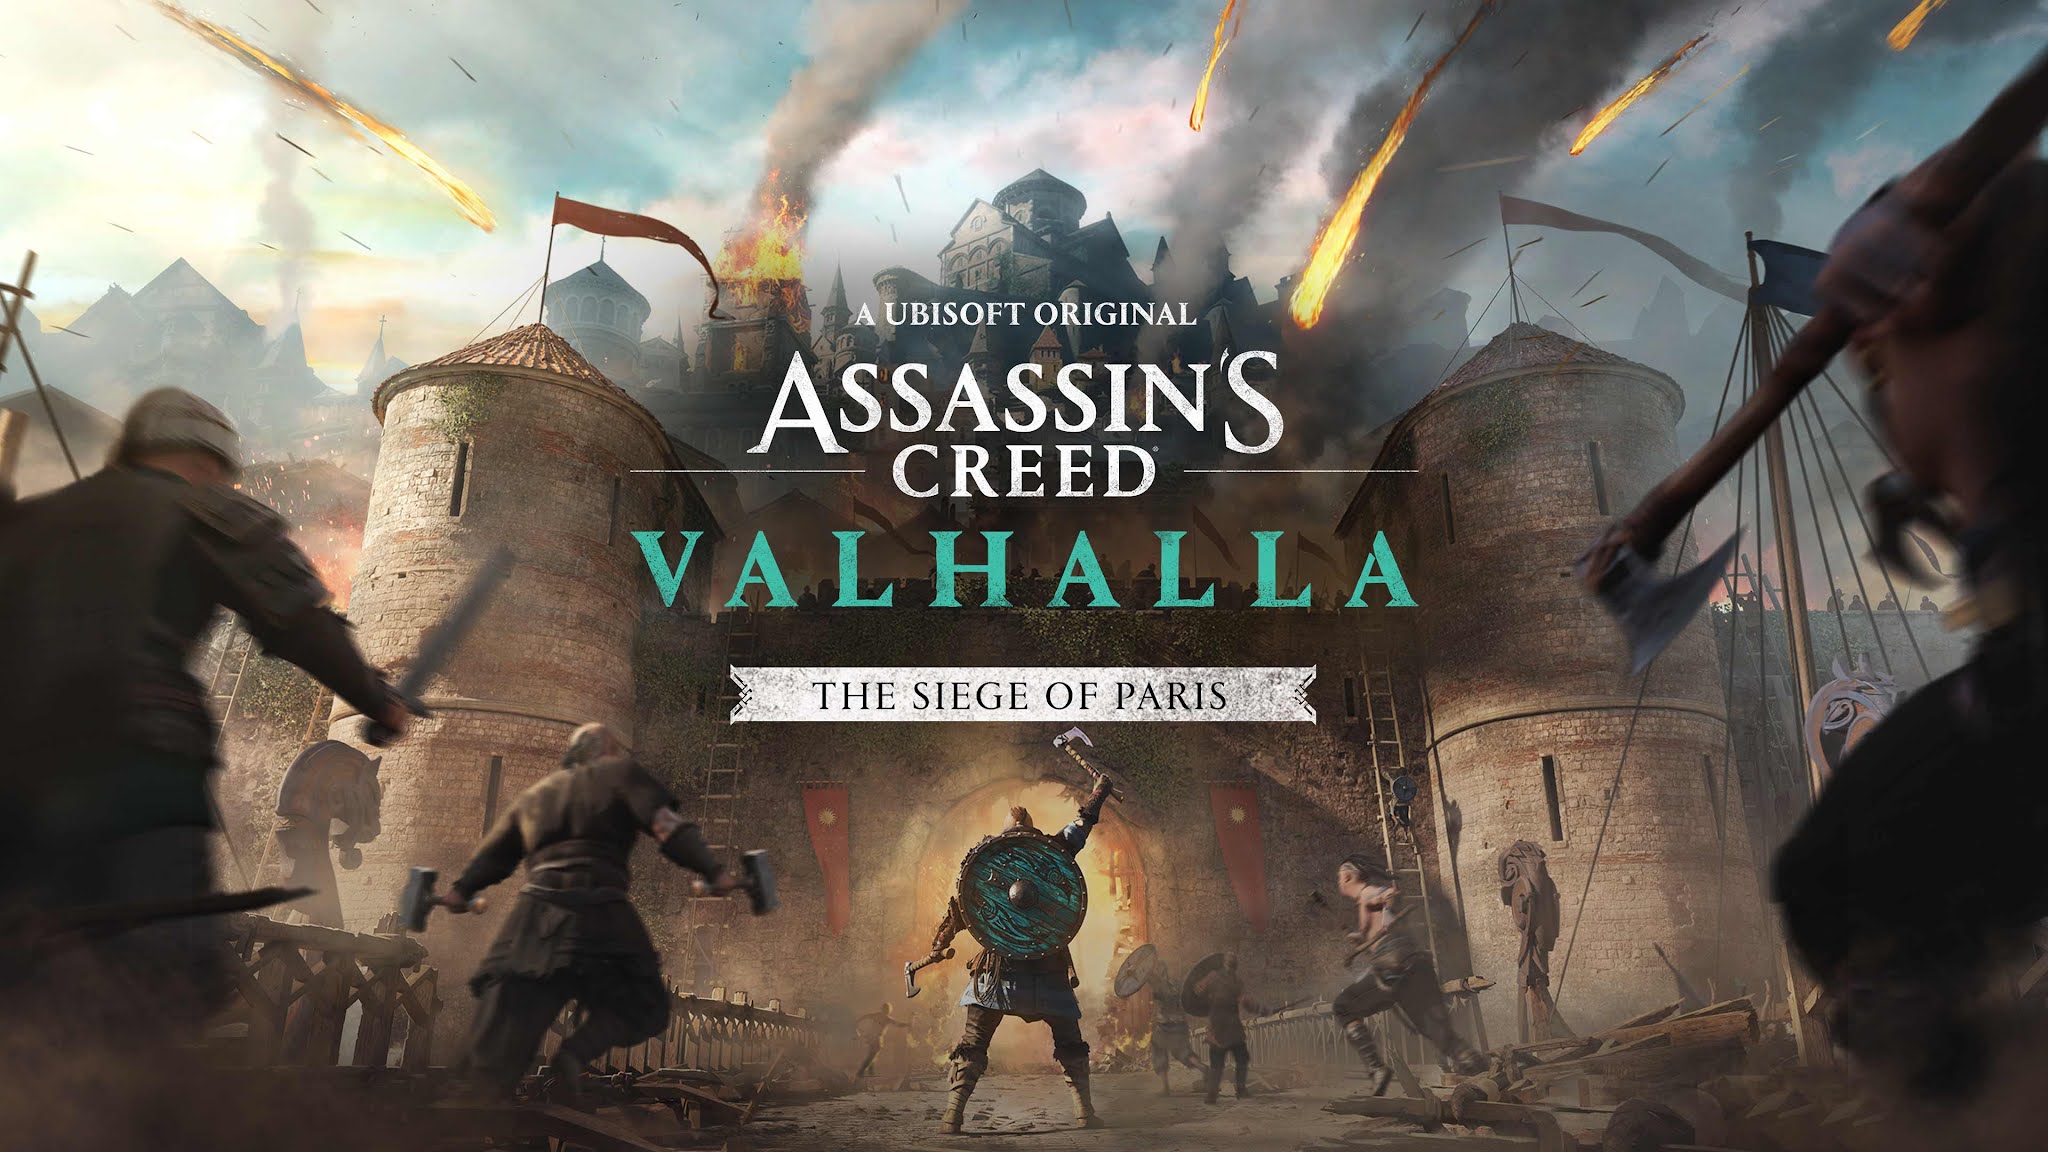 Assassin's Creed: Valhalla - Siege of Paris - Where to Find New Weapons and Armor